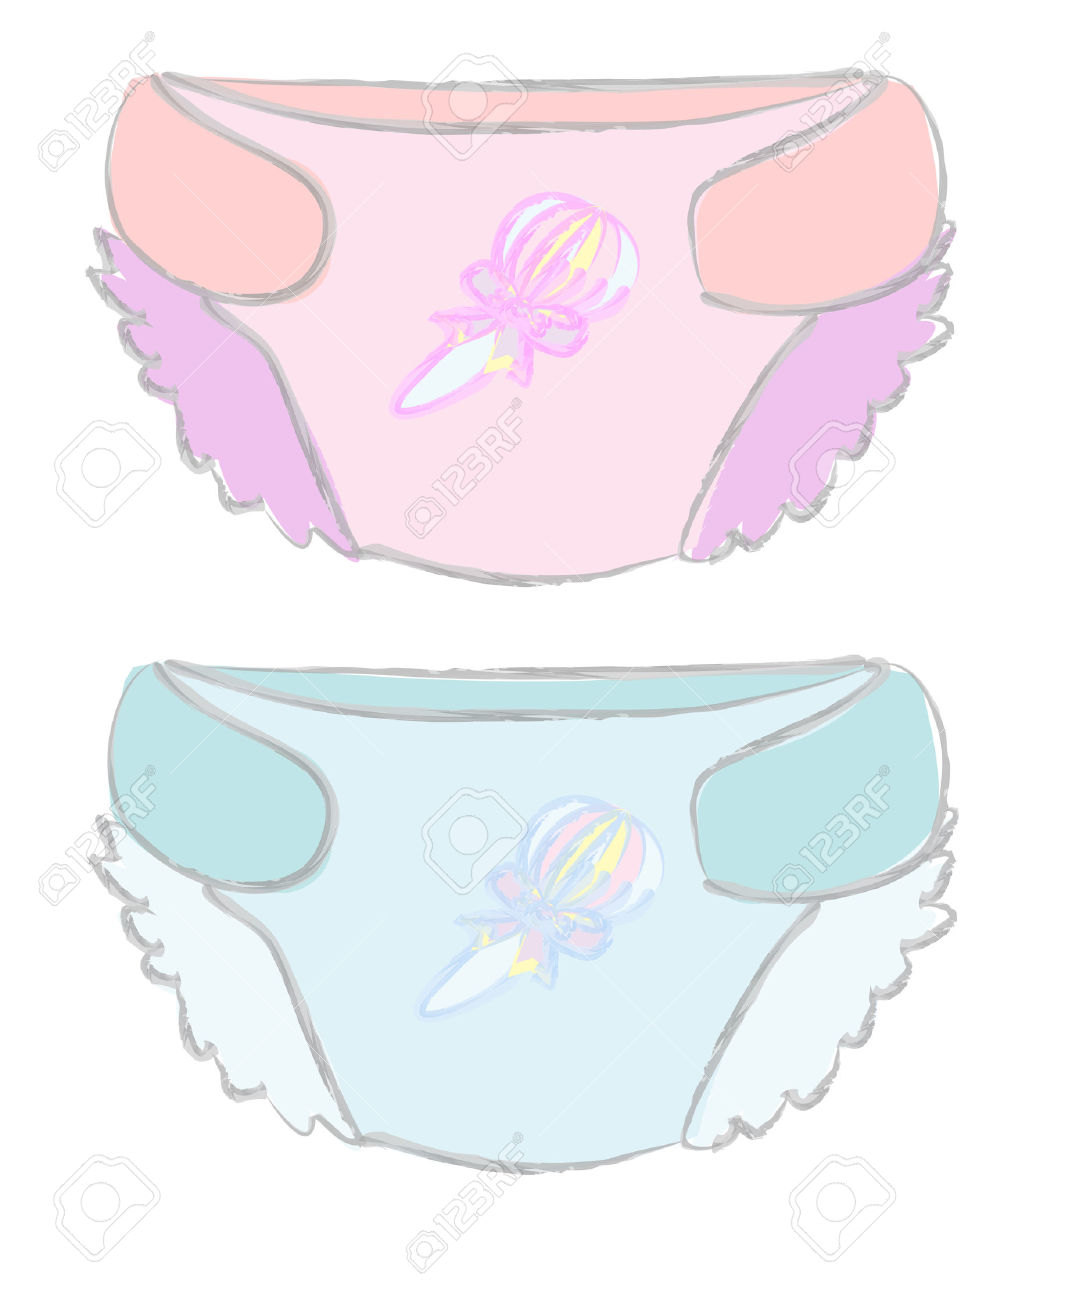 Baby in diaper clipart clipart.